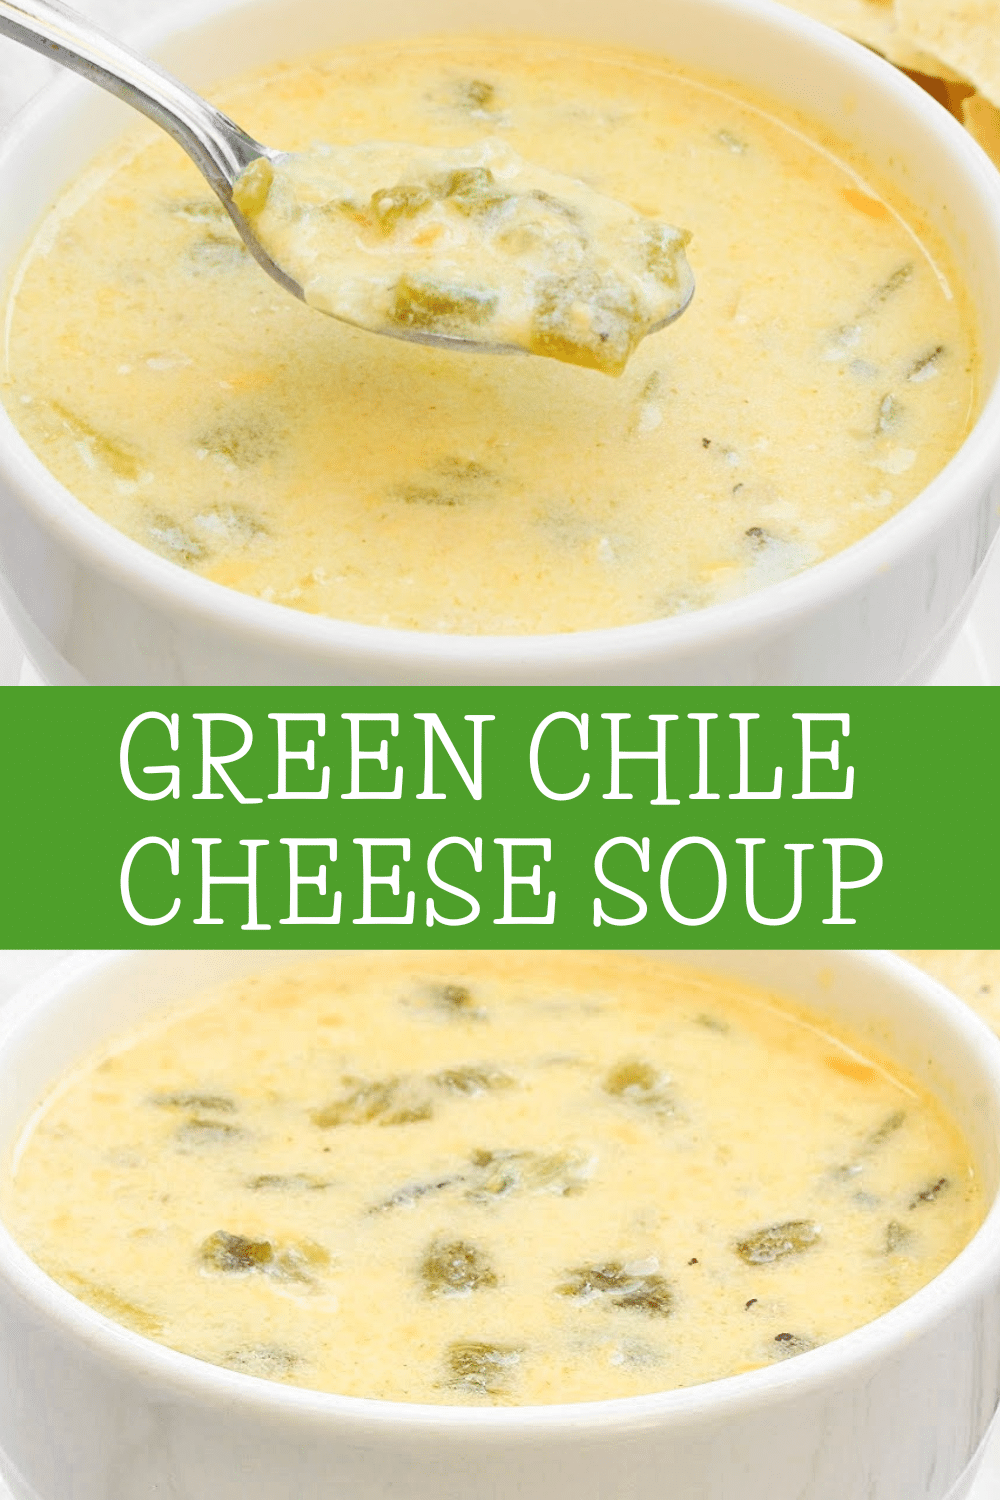 Green Chile Cheese Soup ~ Vegetarian and Vegan Recipe ~ Rich and spicy soup featuring fire-roasted green chiles and cheddar cheese! via @thiswifecooks